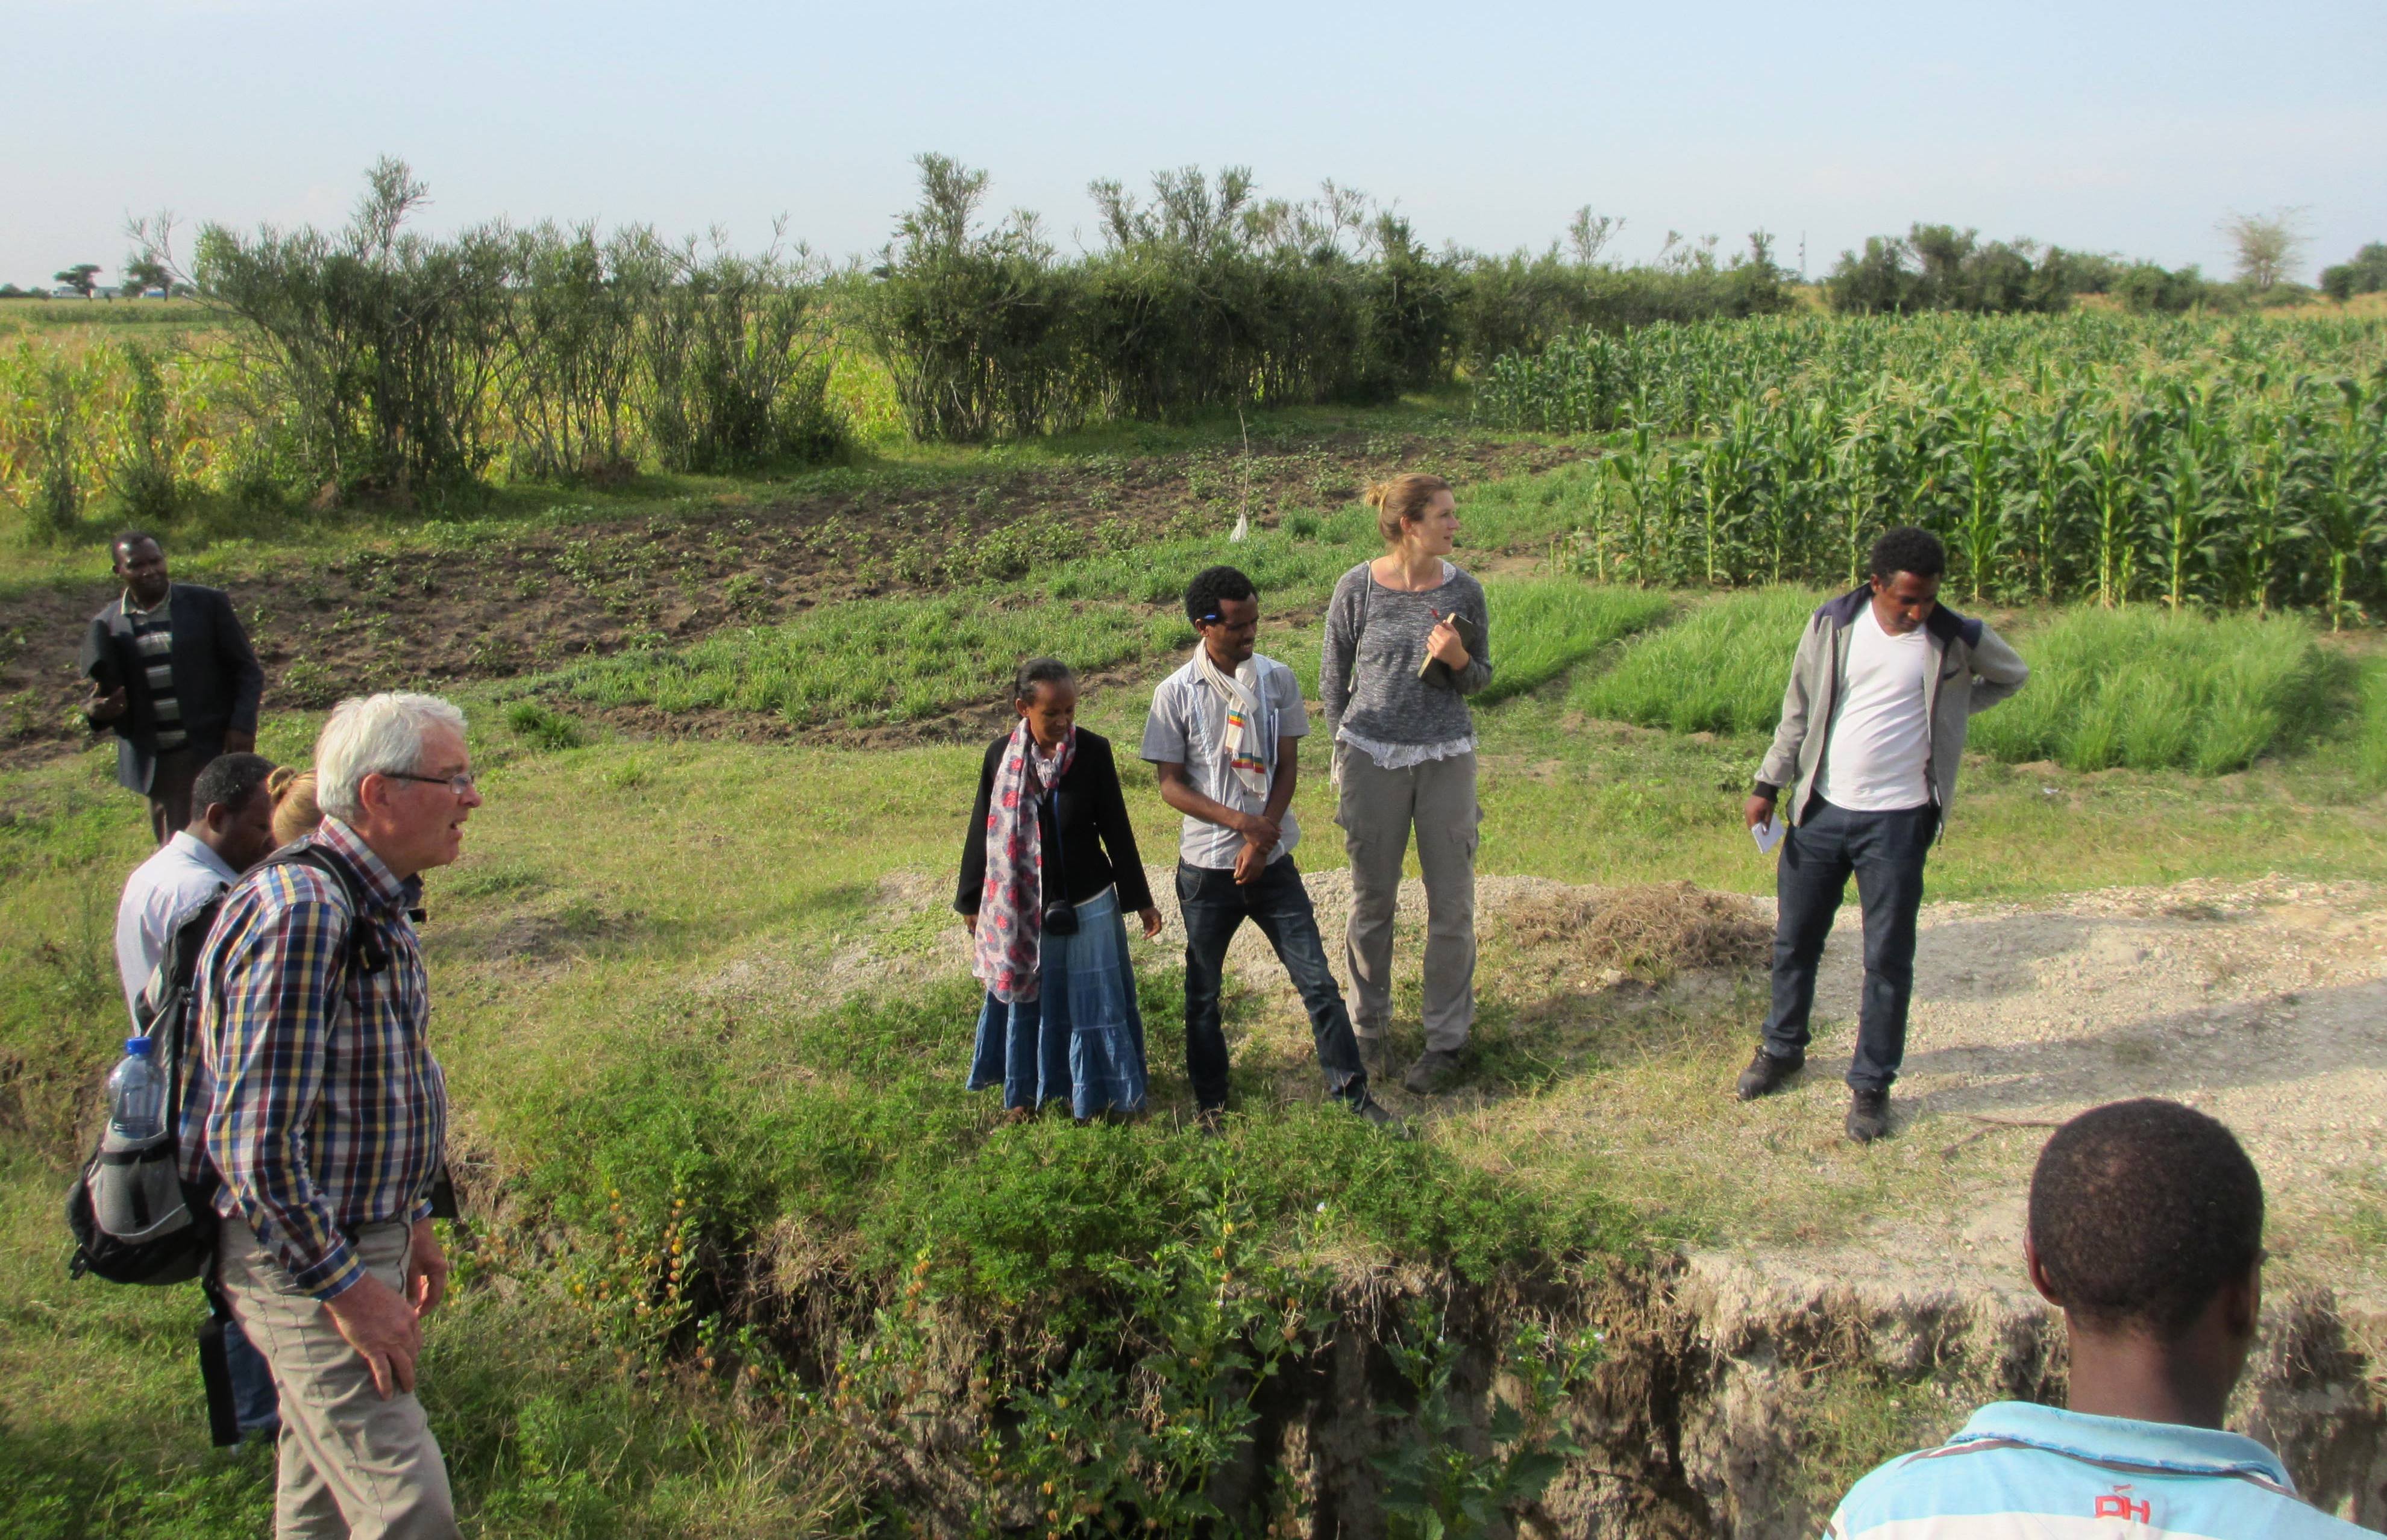 Students and staff visiting the demonstration field of a Farmer Training Center, Meki area